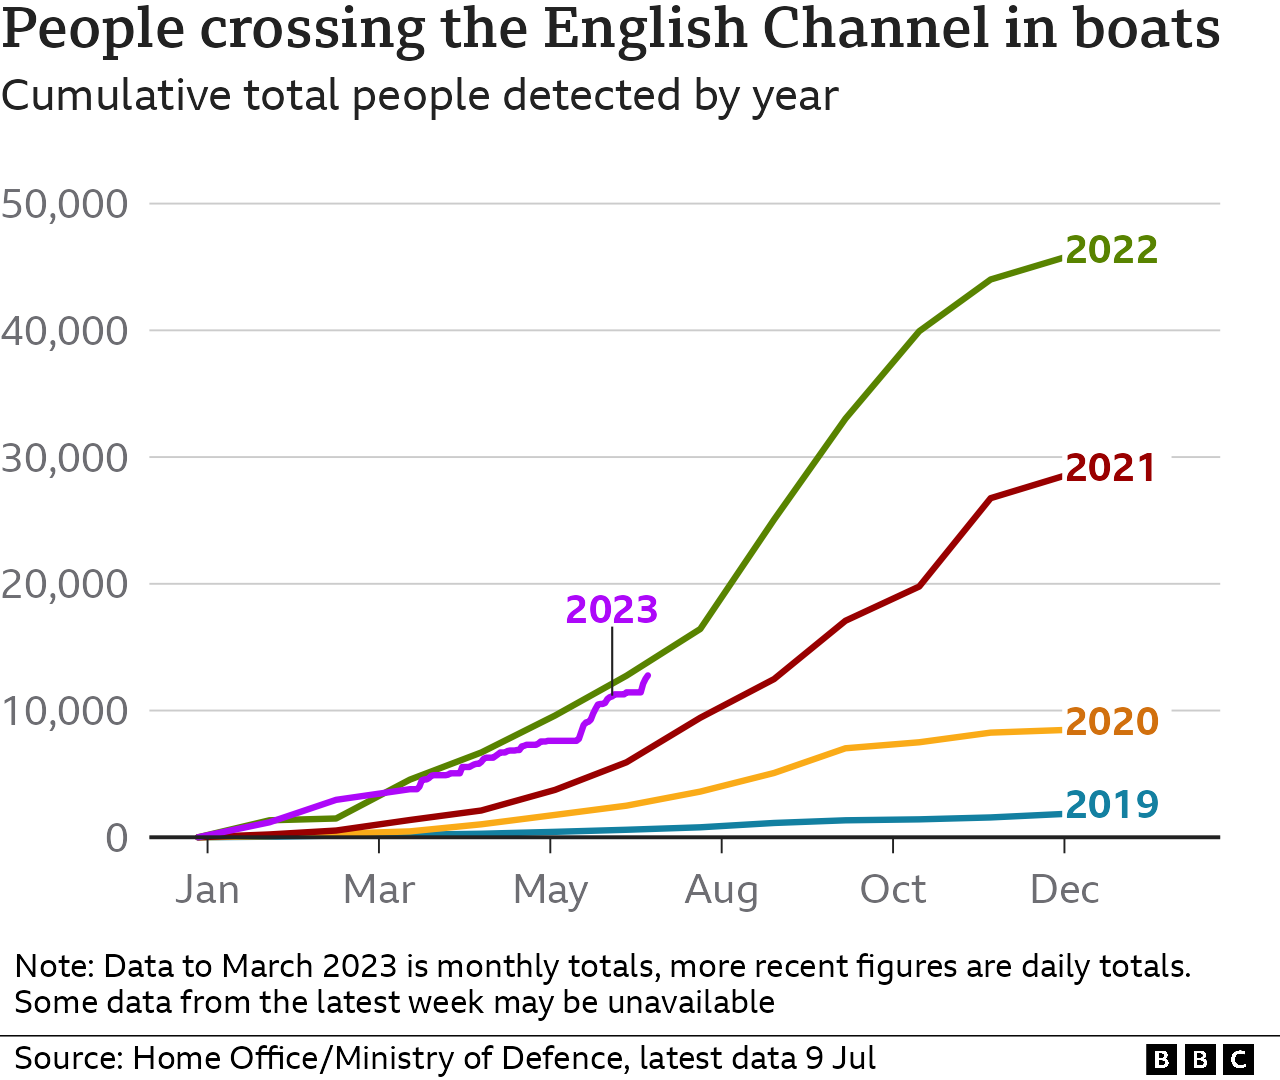 A line chart, where each line represents a year from 2019 to 2023, showing the cumulative number of people detected crossing the English Channel on small boats between January and December. The total gets progressively higher year-on-year, with nearly 46,000 people detected by the end of 2022. The 2023 data is about 12,700 as of 9 July, slightly below the levels seen at the same time in 2022.